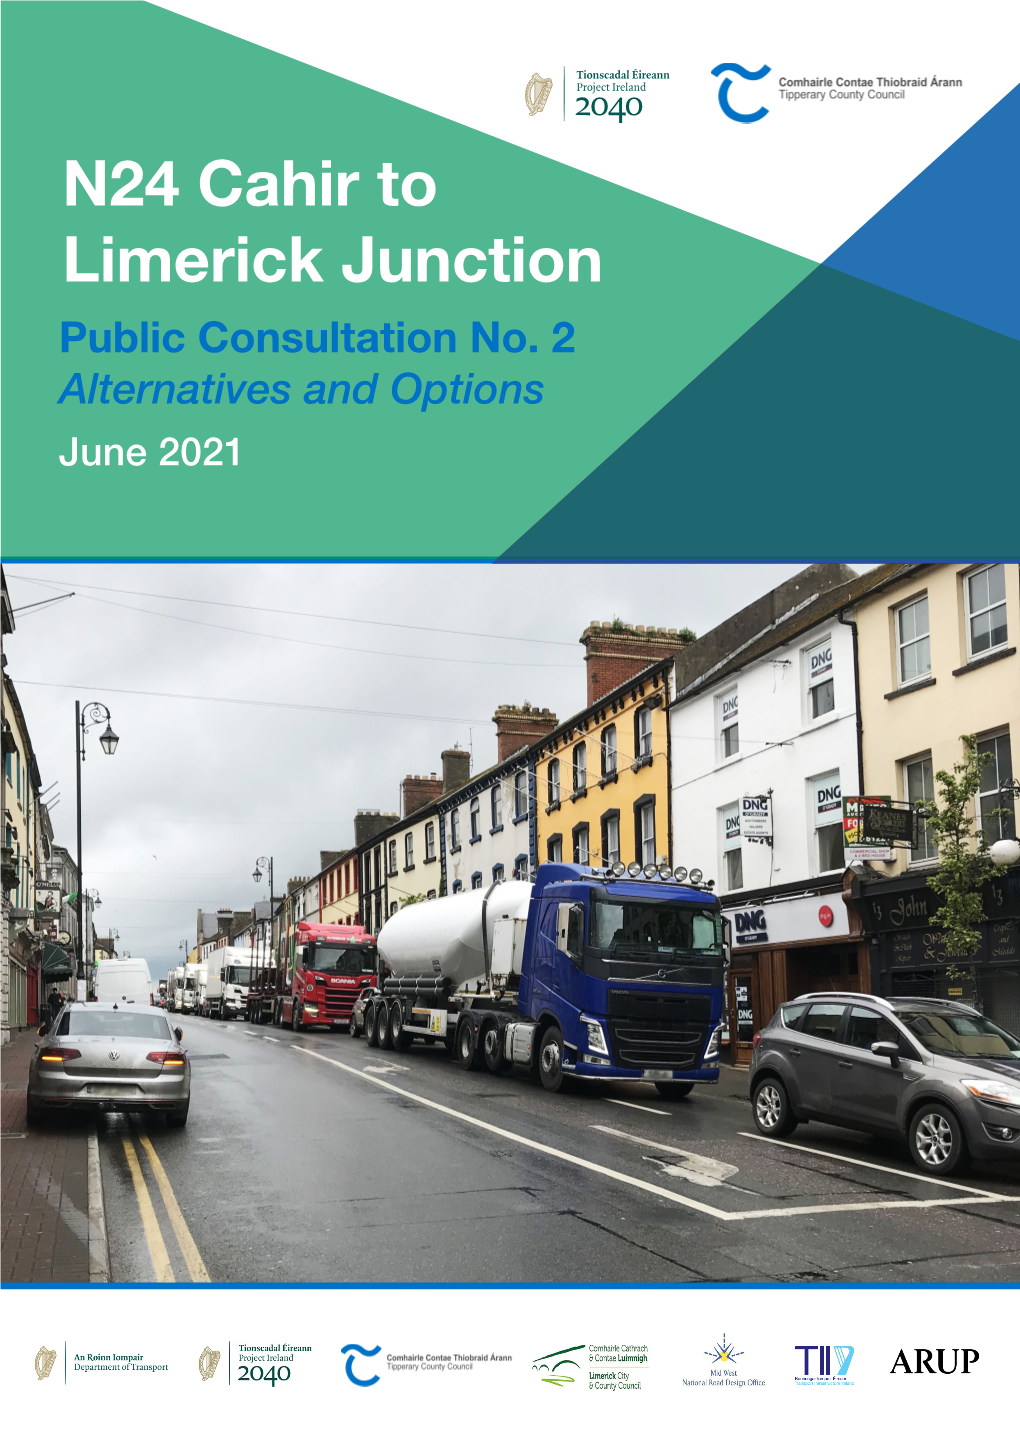 N24 Cahir to Limerick Junction Public Consultation No